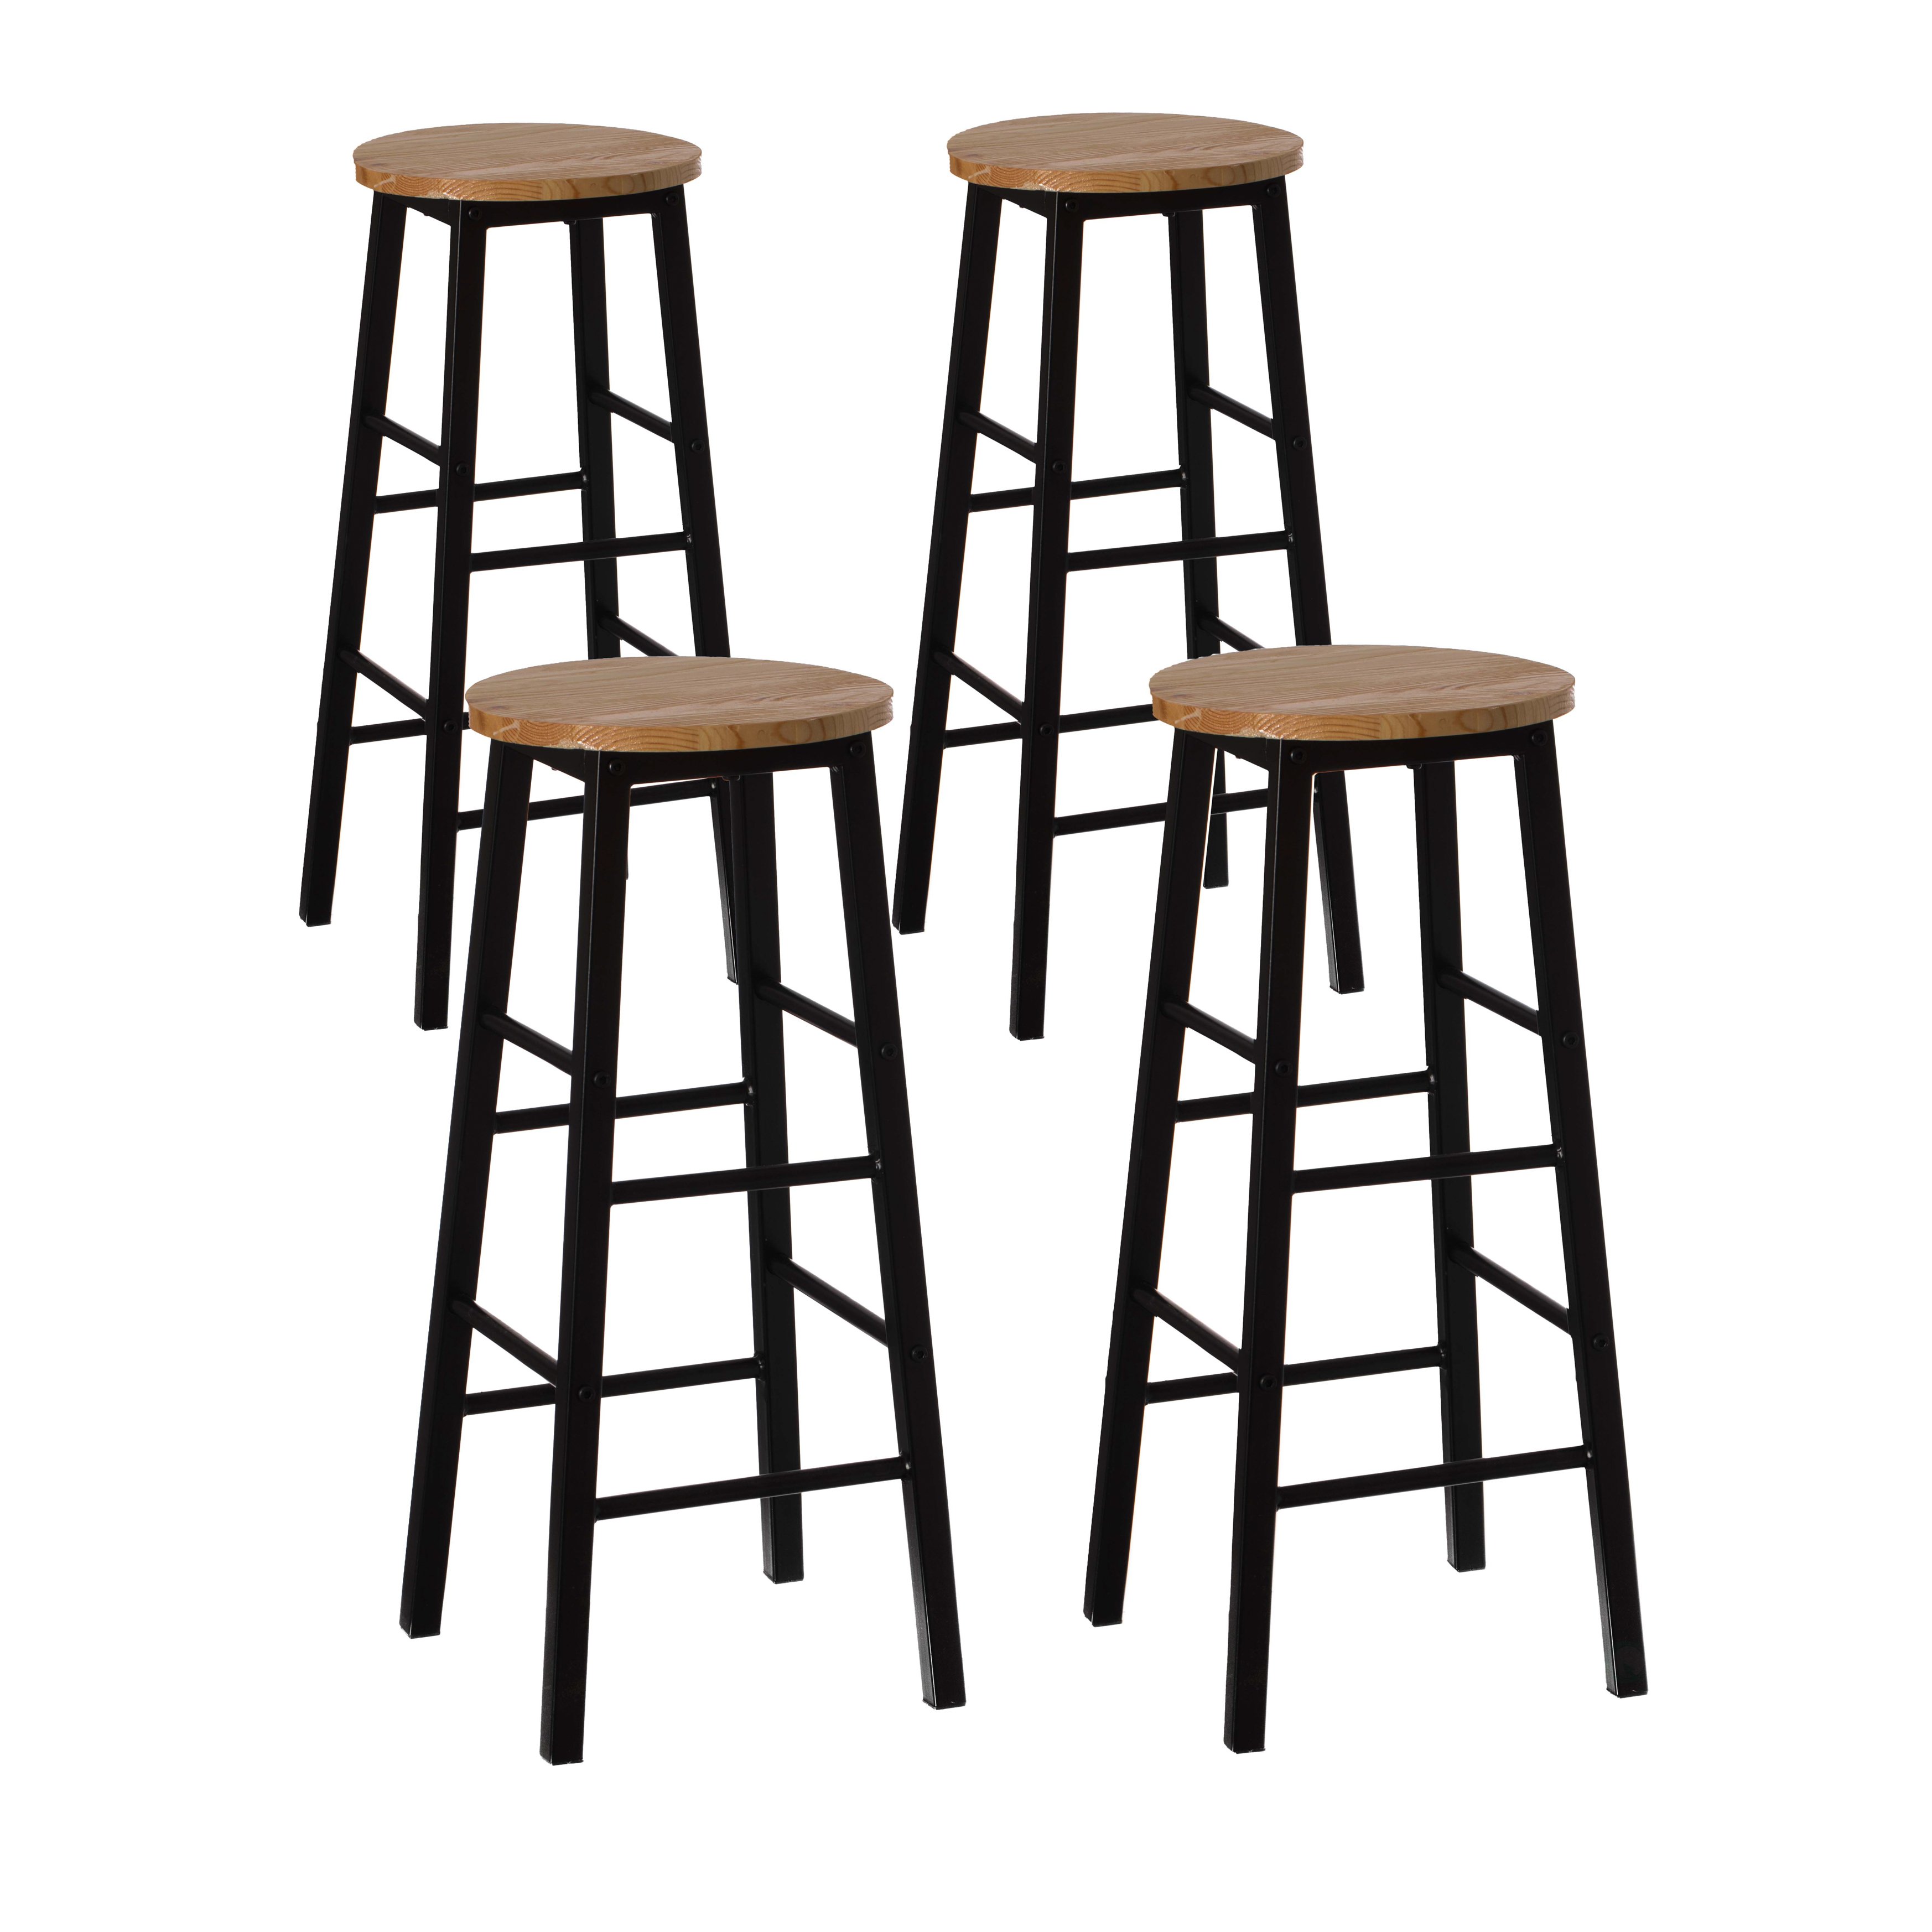 28 High Wooden Rustic Round Bar Stool With Footrest For Indoor And Outdoor - Set Of 4